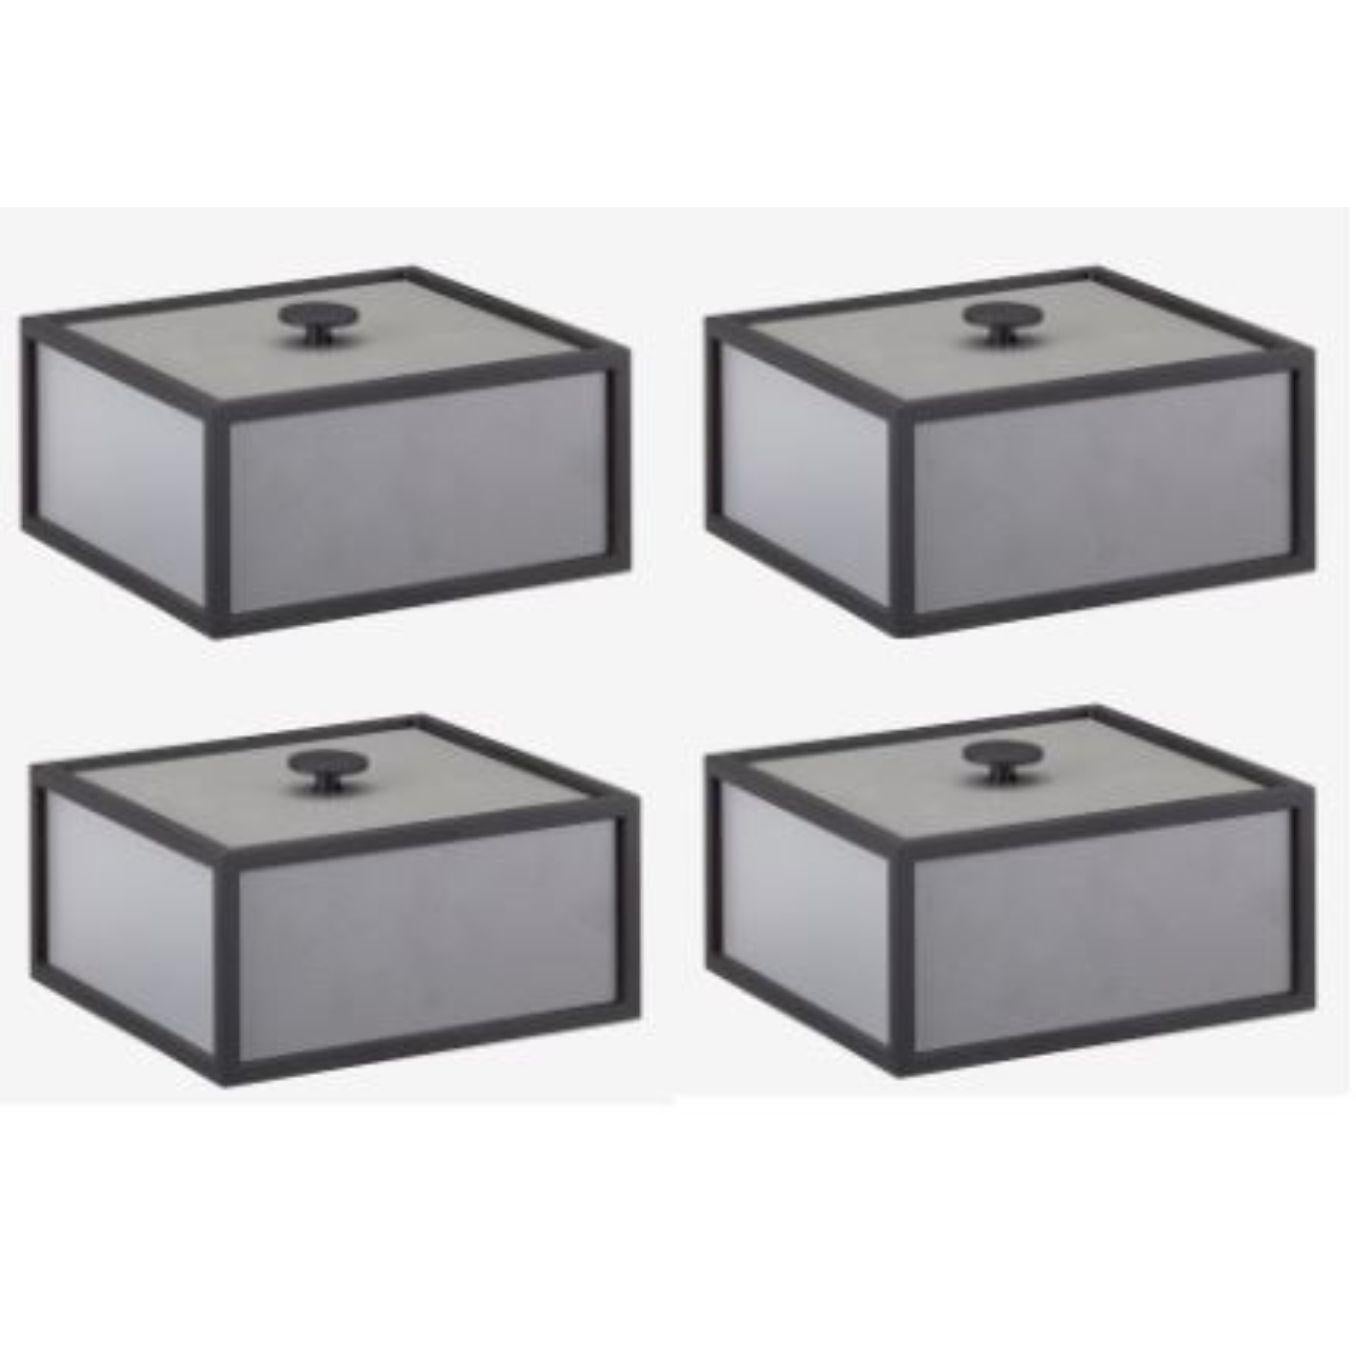 Set of 4 dark grey frame 14 box by Lassen
Dimensions: D 10 x W 10 x H 7 cm 
Materials: Finér, Melamin, Melamine, Metal, Veneer
Weight: 1.10 Kg

Frame box is a square box in a cubistic shape. The simple boxes are inspired by the Kubus